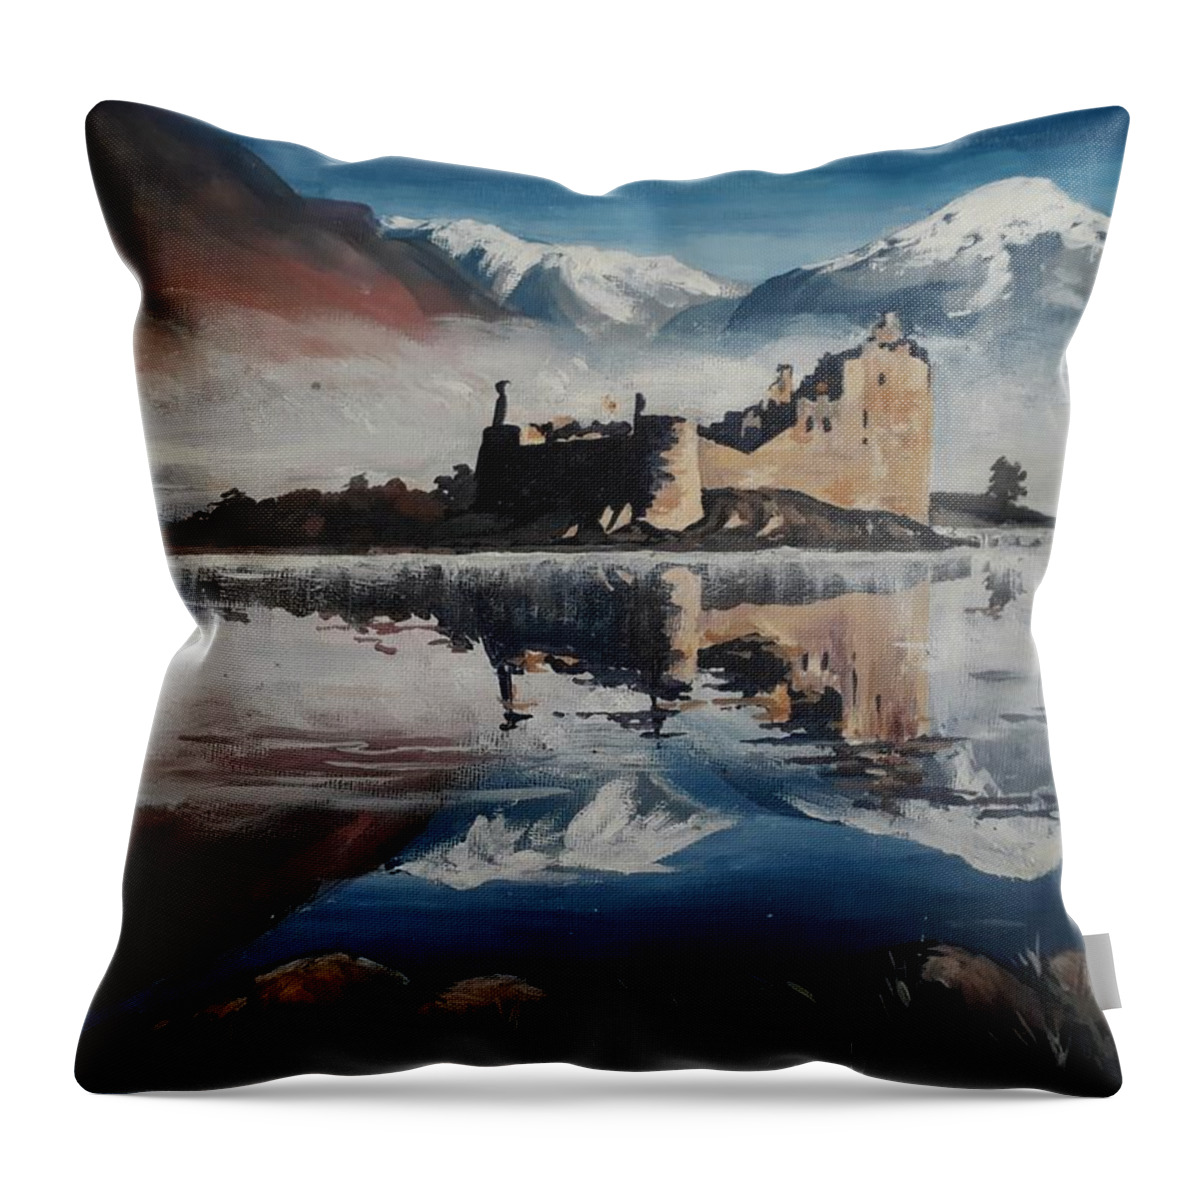 Landscape Throw Pillow featuring the painting Castle in Scotland by Natalia Shtainfeld-Borovkov